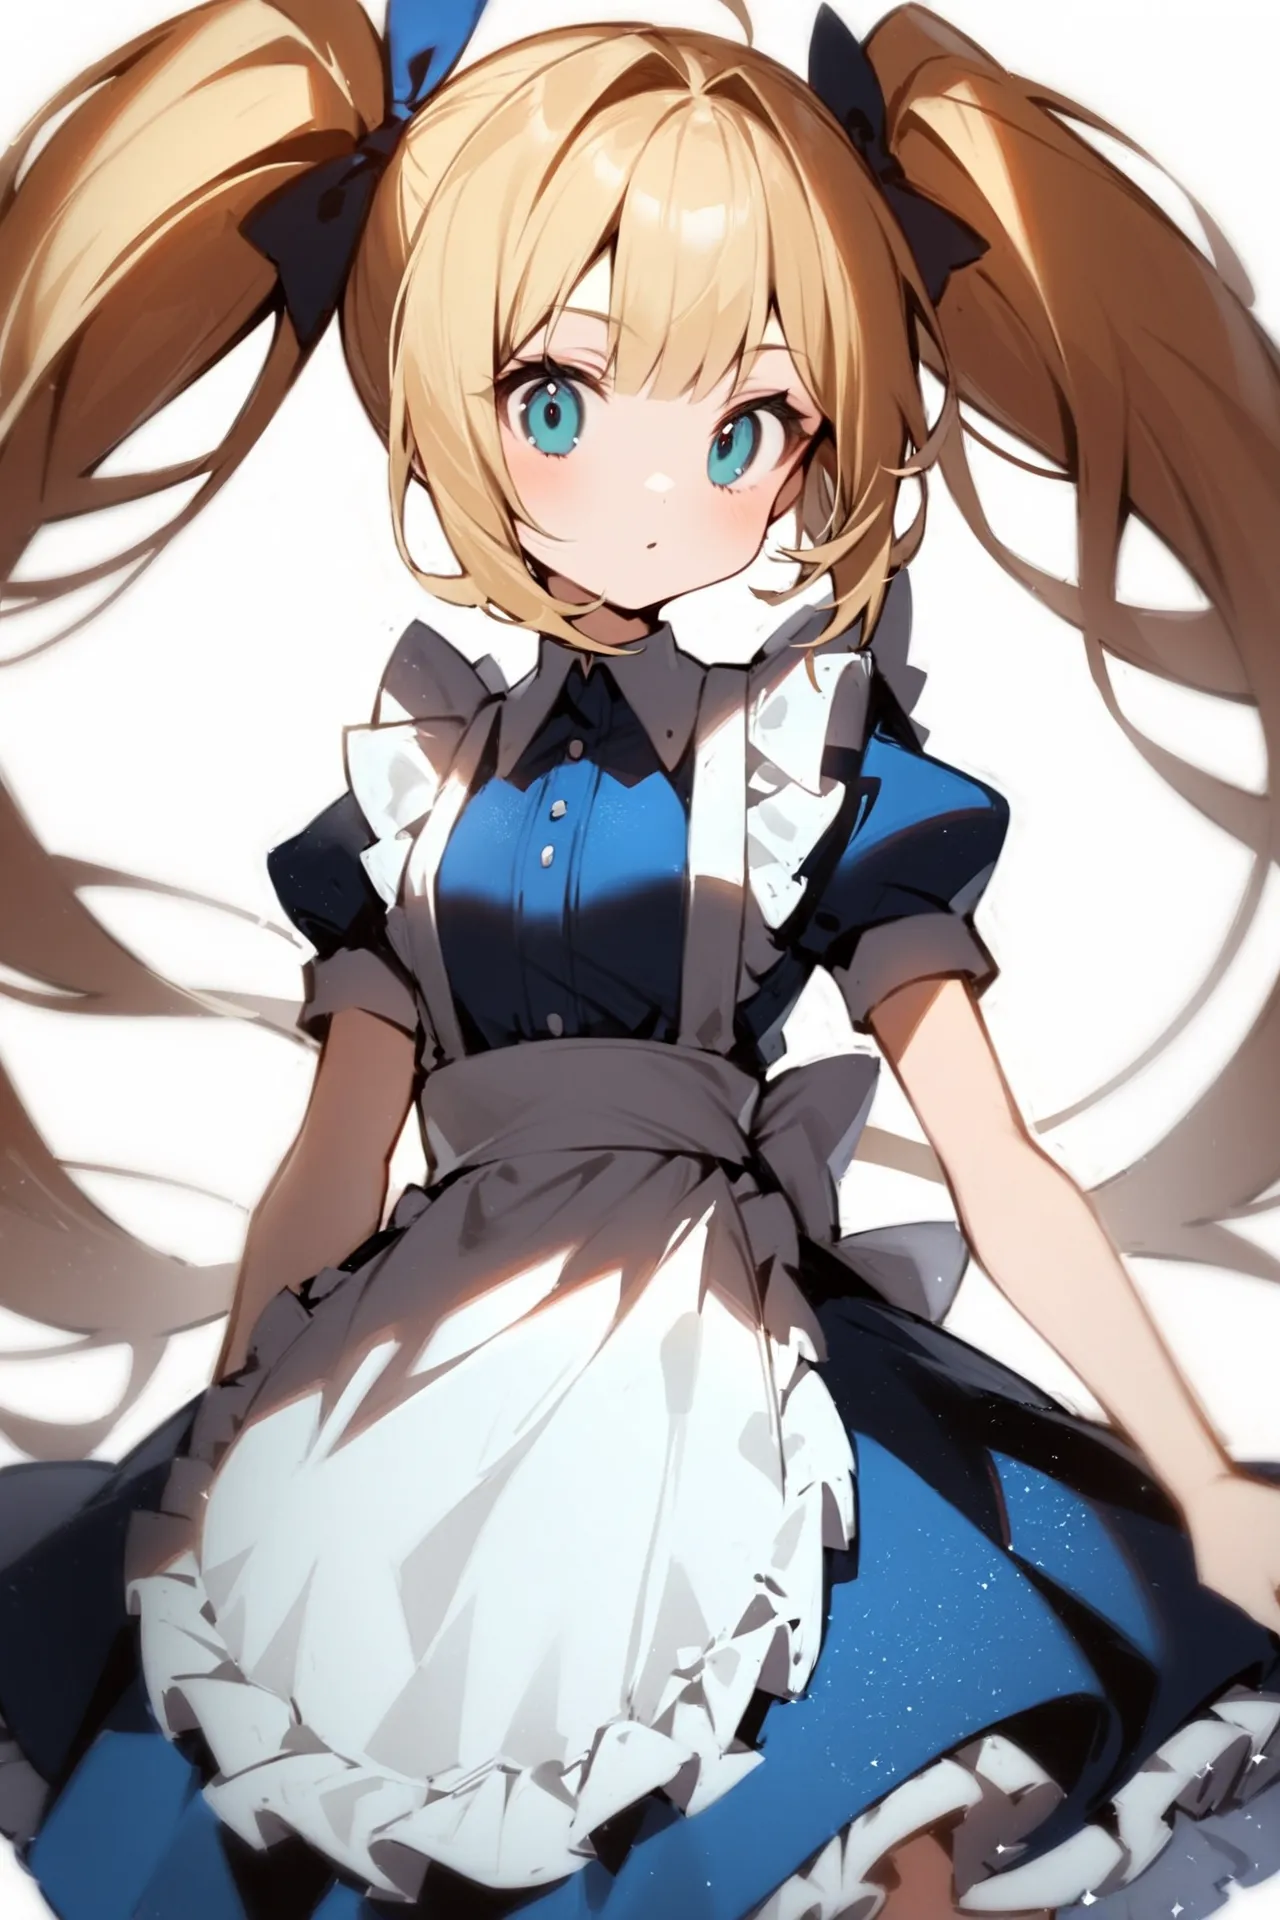 '1girl, cowboy shot,\nblonde hair, twintails, blue dress, white apron,\nwhite background,\nAlice in glitterworld\nNegative prompt: (worst quality, low quality:1.4), nsfw\nSteps: 35, Sampler: DPM++ 2M SDE Karras, CFG scale: 7, Seed: 1, Size: 640x960, Model hash: 642b08ca49, Model: ConfusionXL2.0_fp16_vae, VAE hash: 63aeecb90f, VAE: sdxl_vae_0.9.safetensors, Denoising strength: 0.6, Clip skip: 2, Hires upscale: 2, Hires steps: 15, Hires upscaler: ESRGAN_4x, Eta: 0.68, Version: v1.7.0'